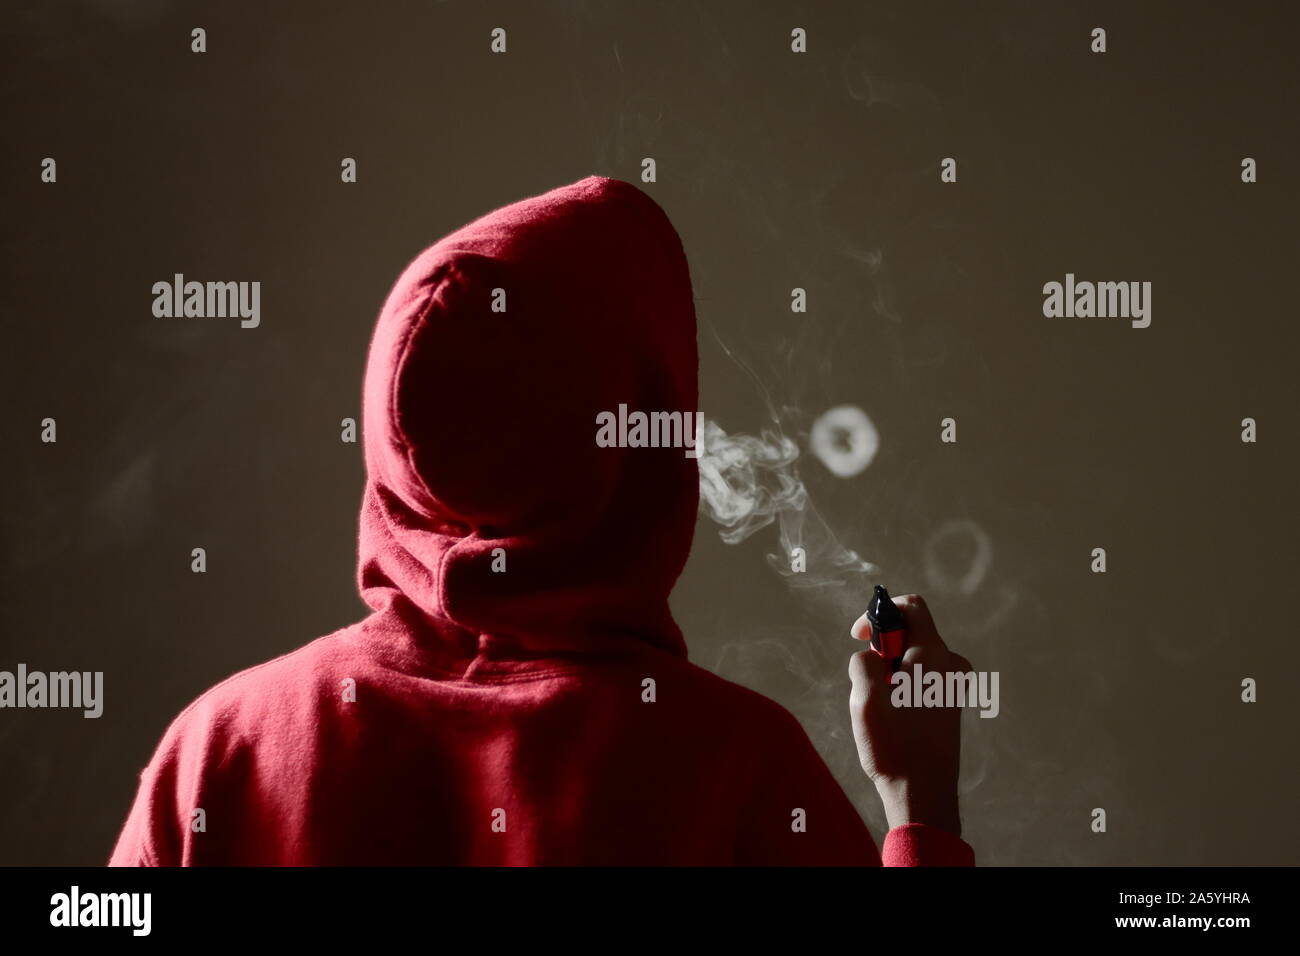 Young male in red hoodie vaping smoking, blows a single smoke ring while holding an electronic cigarette in hand, isolated rear view Stock Photo